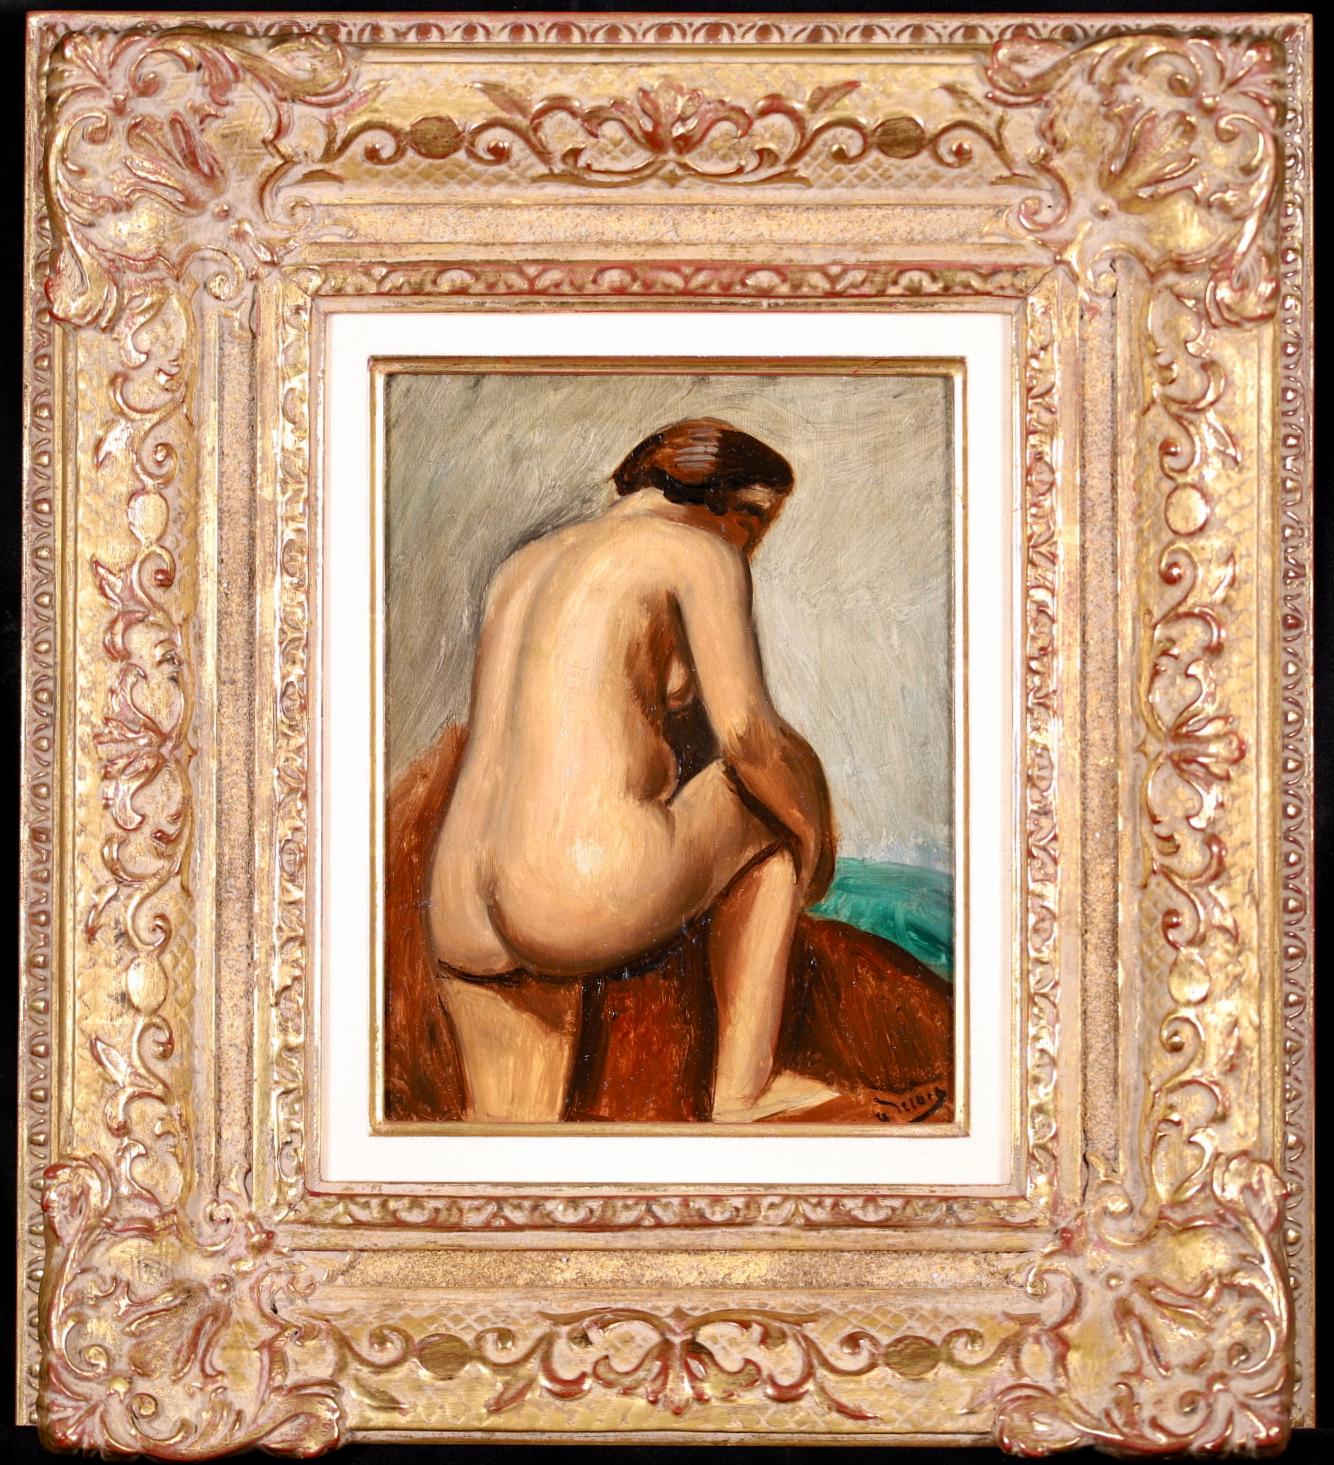 Nu - French Fauvist Oil, Nude Figure in Interior by Andre Derain - Painting by André Derain